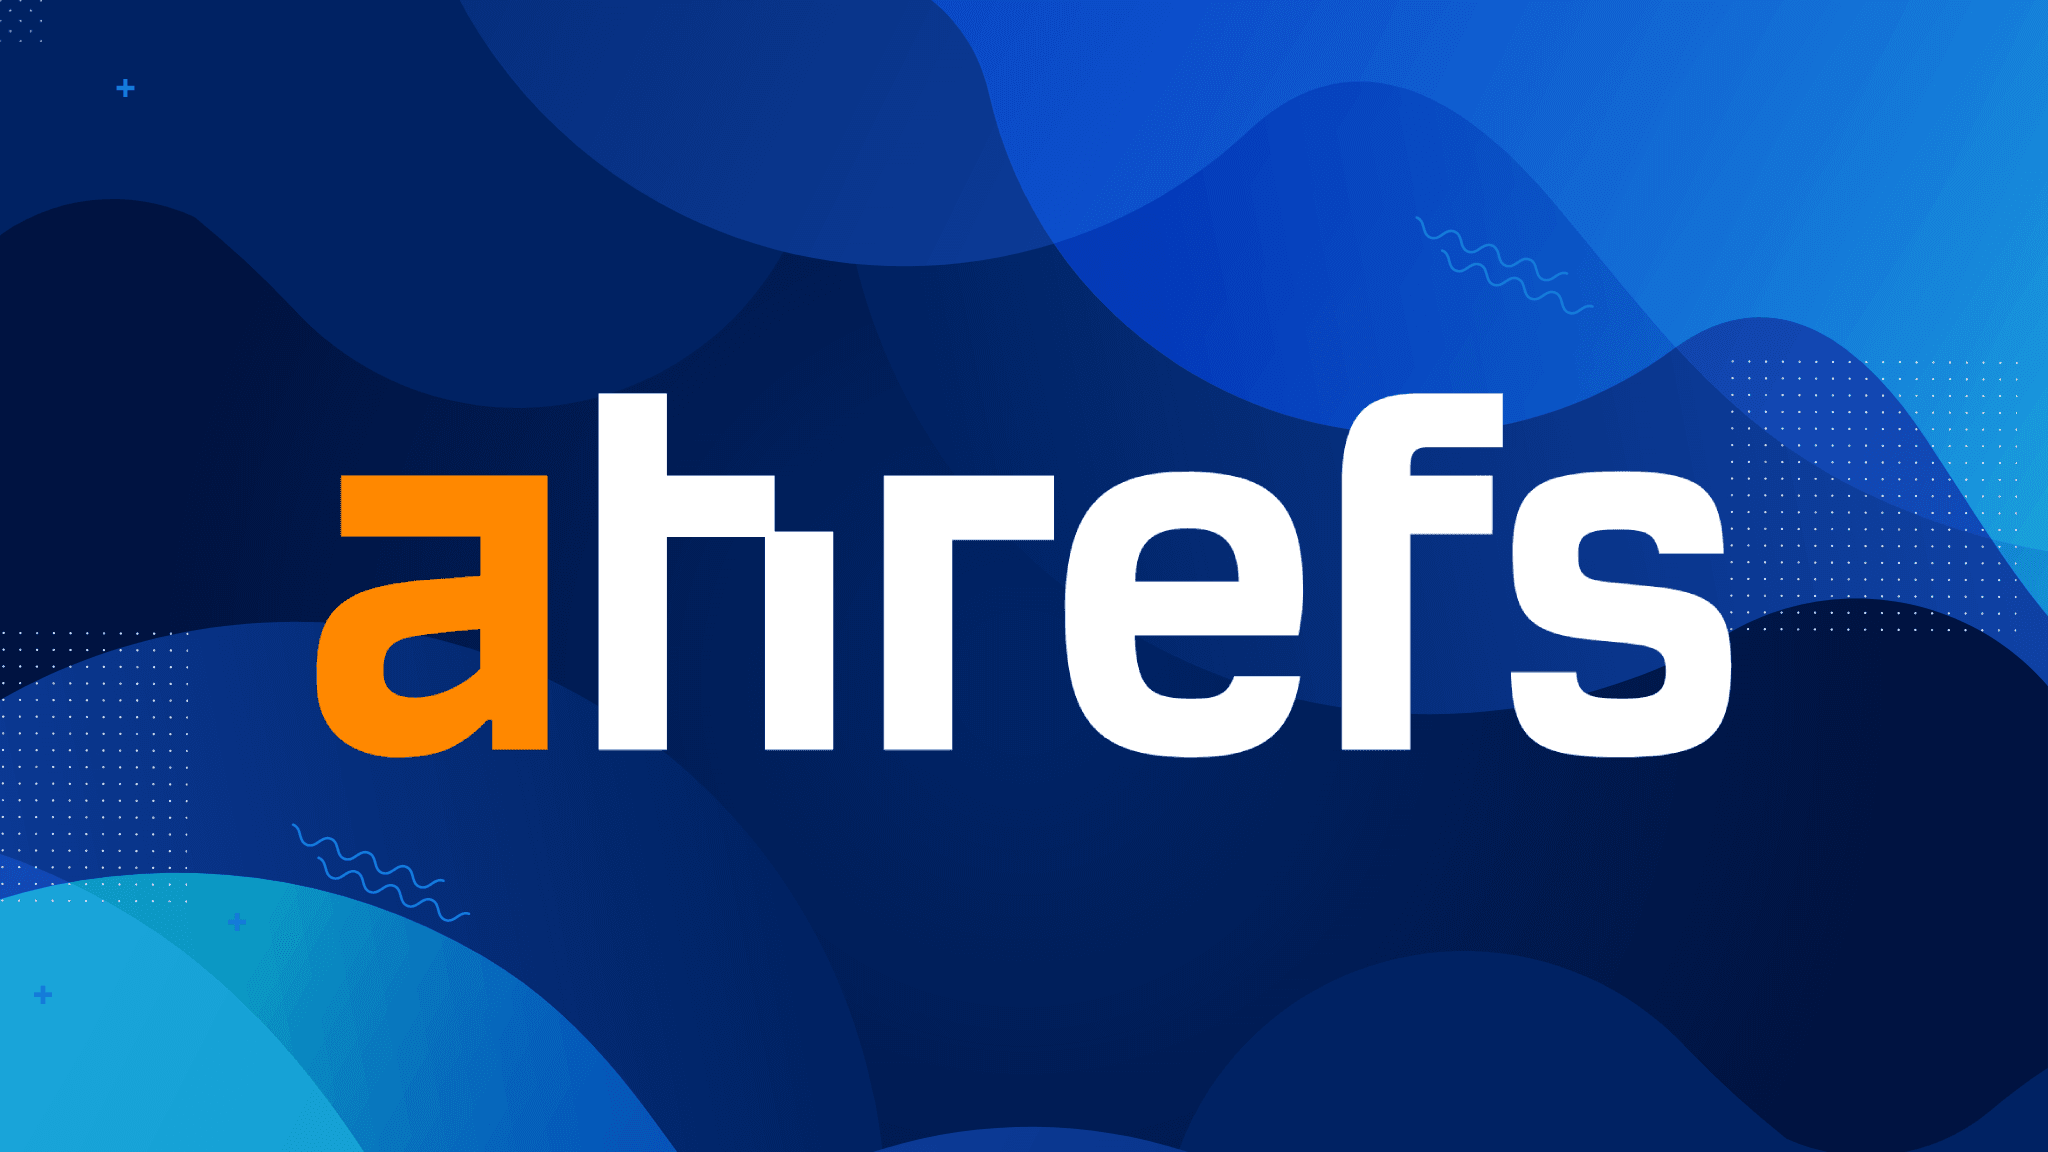 ahrefs logo Everything you need to rank higher and get more traffic